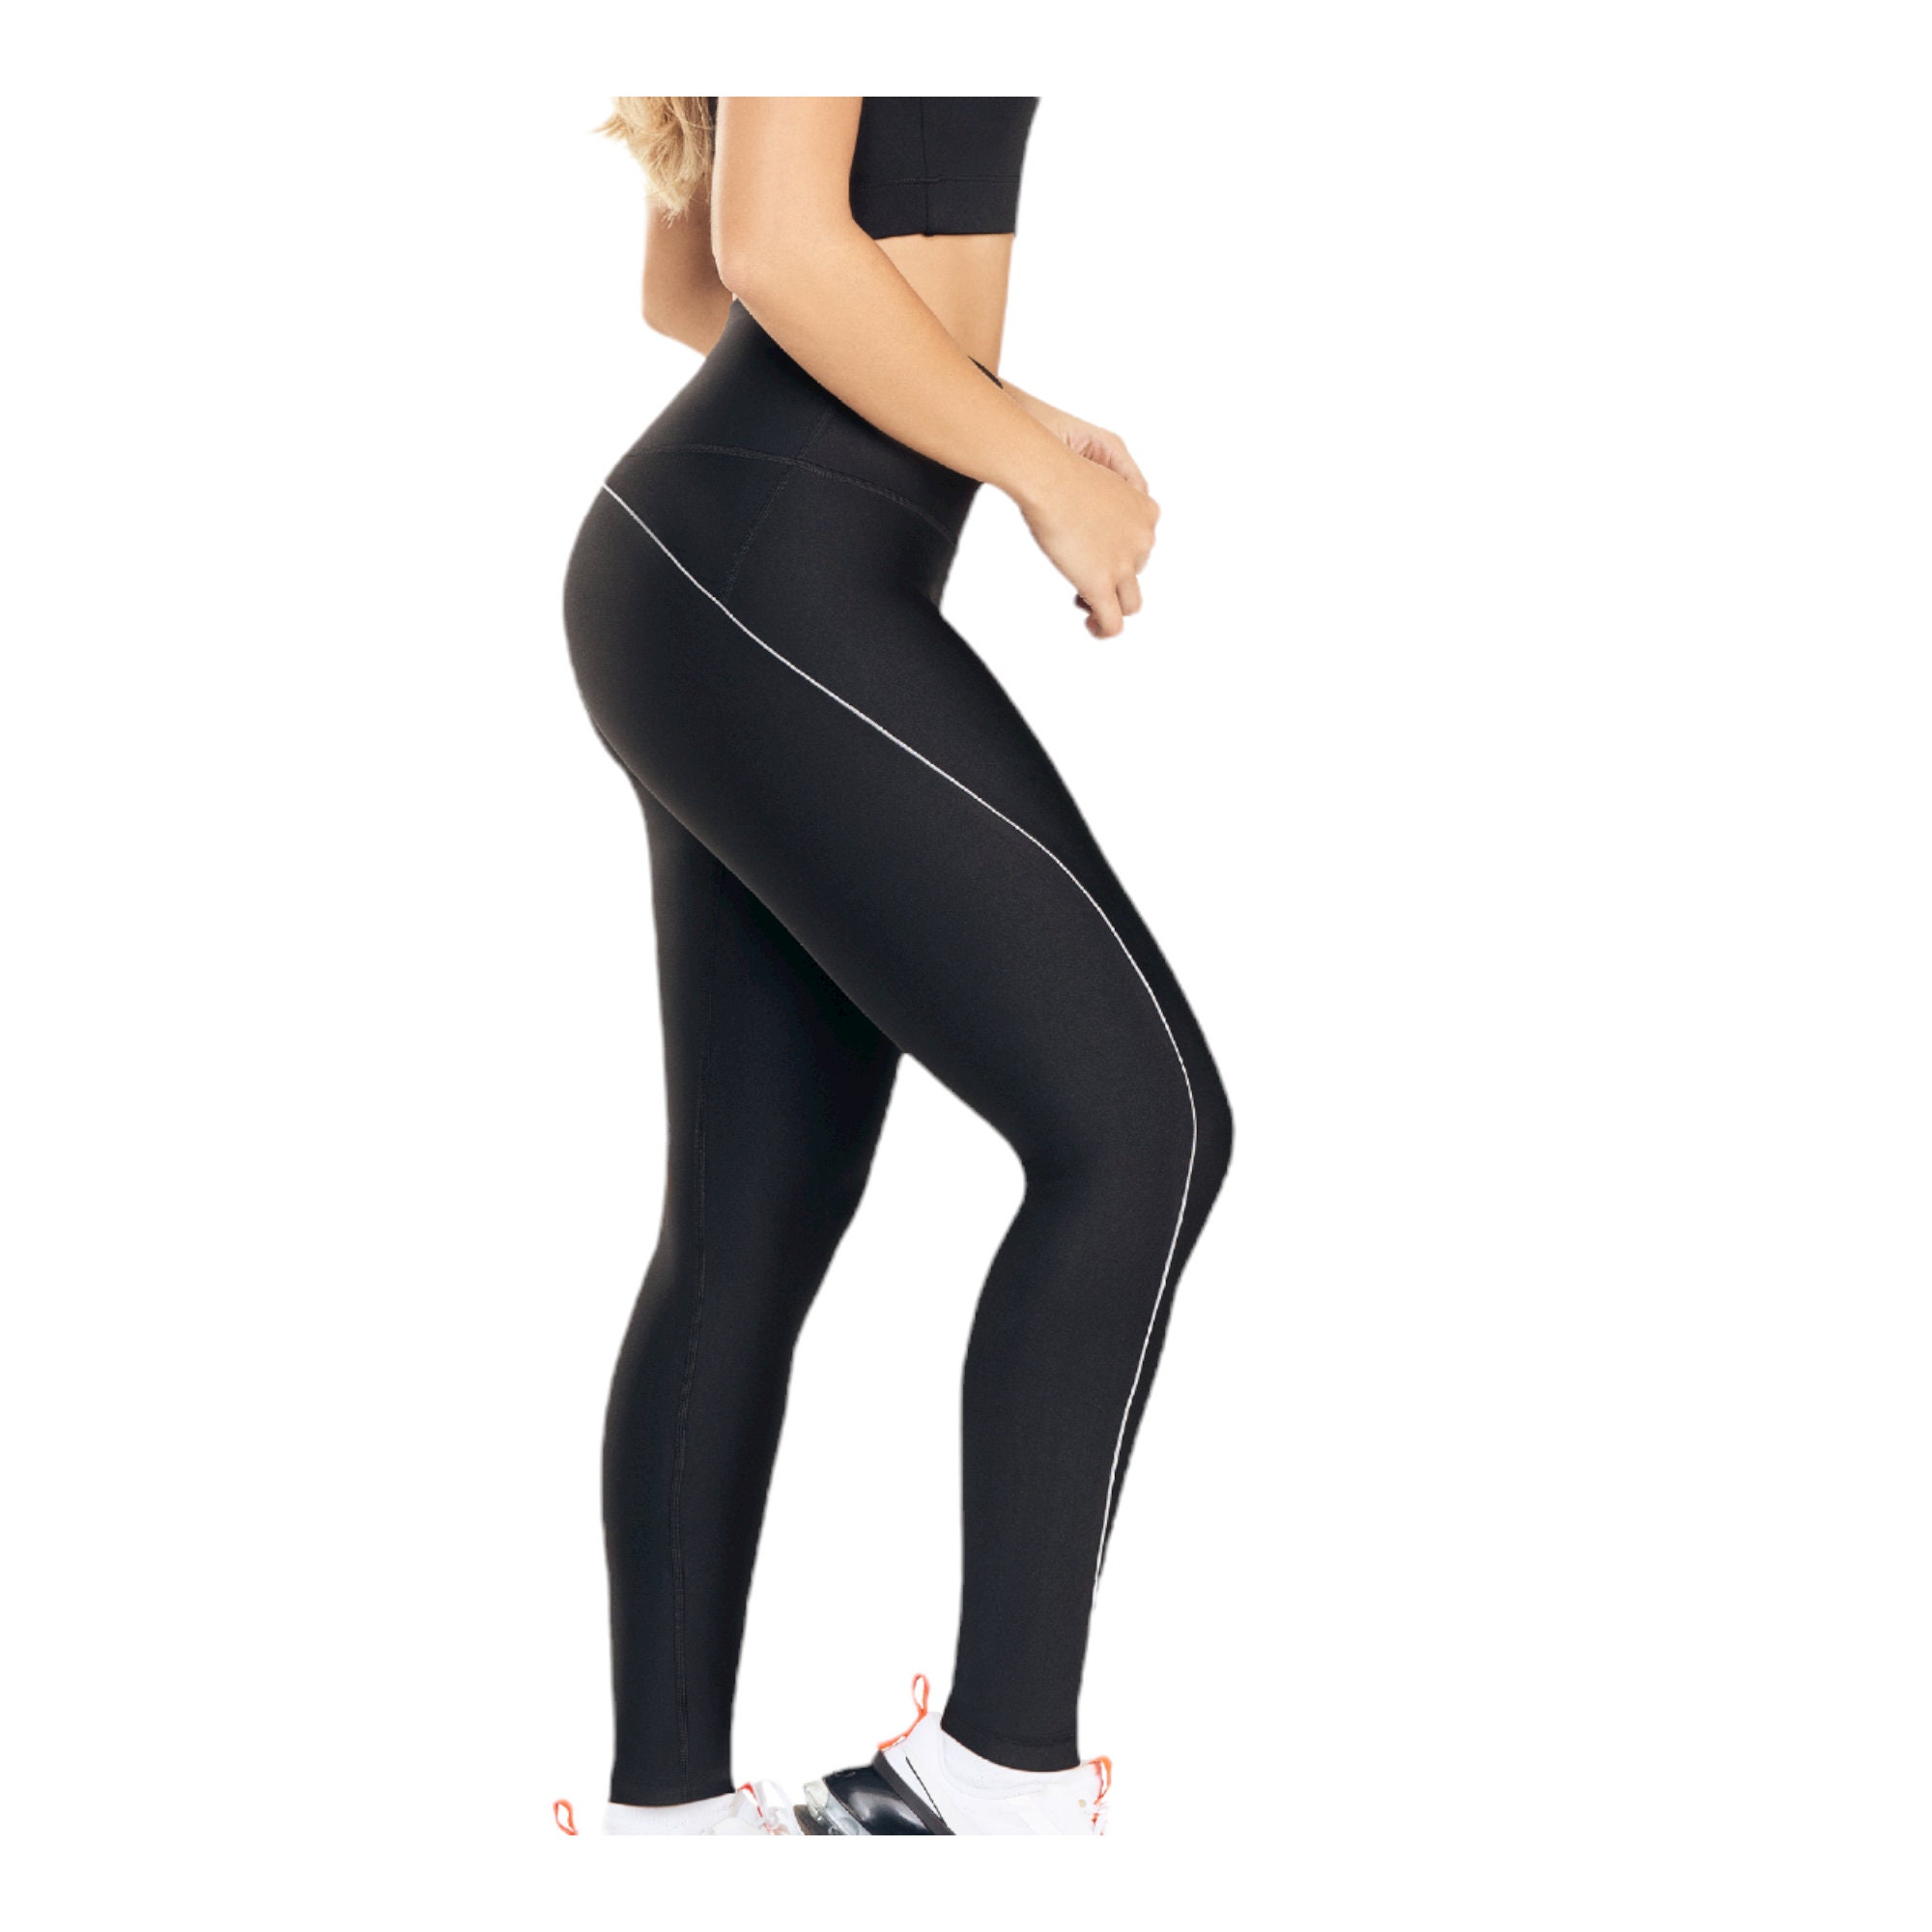 Proactivewear Women's High-Waisted Business Casual Leggings Yoga & Workout  Pants Women's S sold by Ismail Abdullah, SKU 42765925